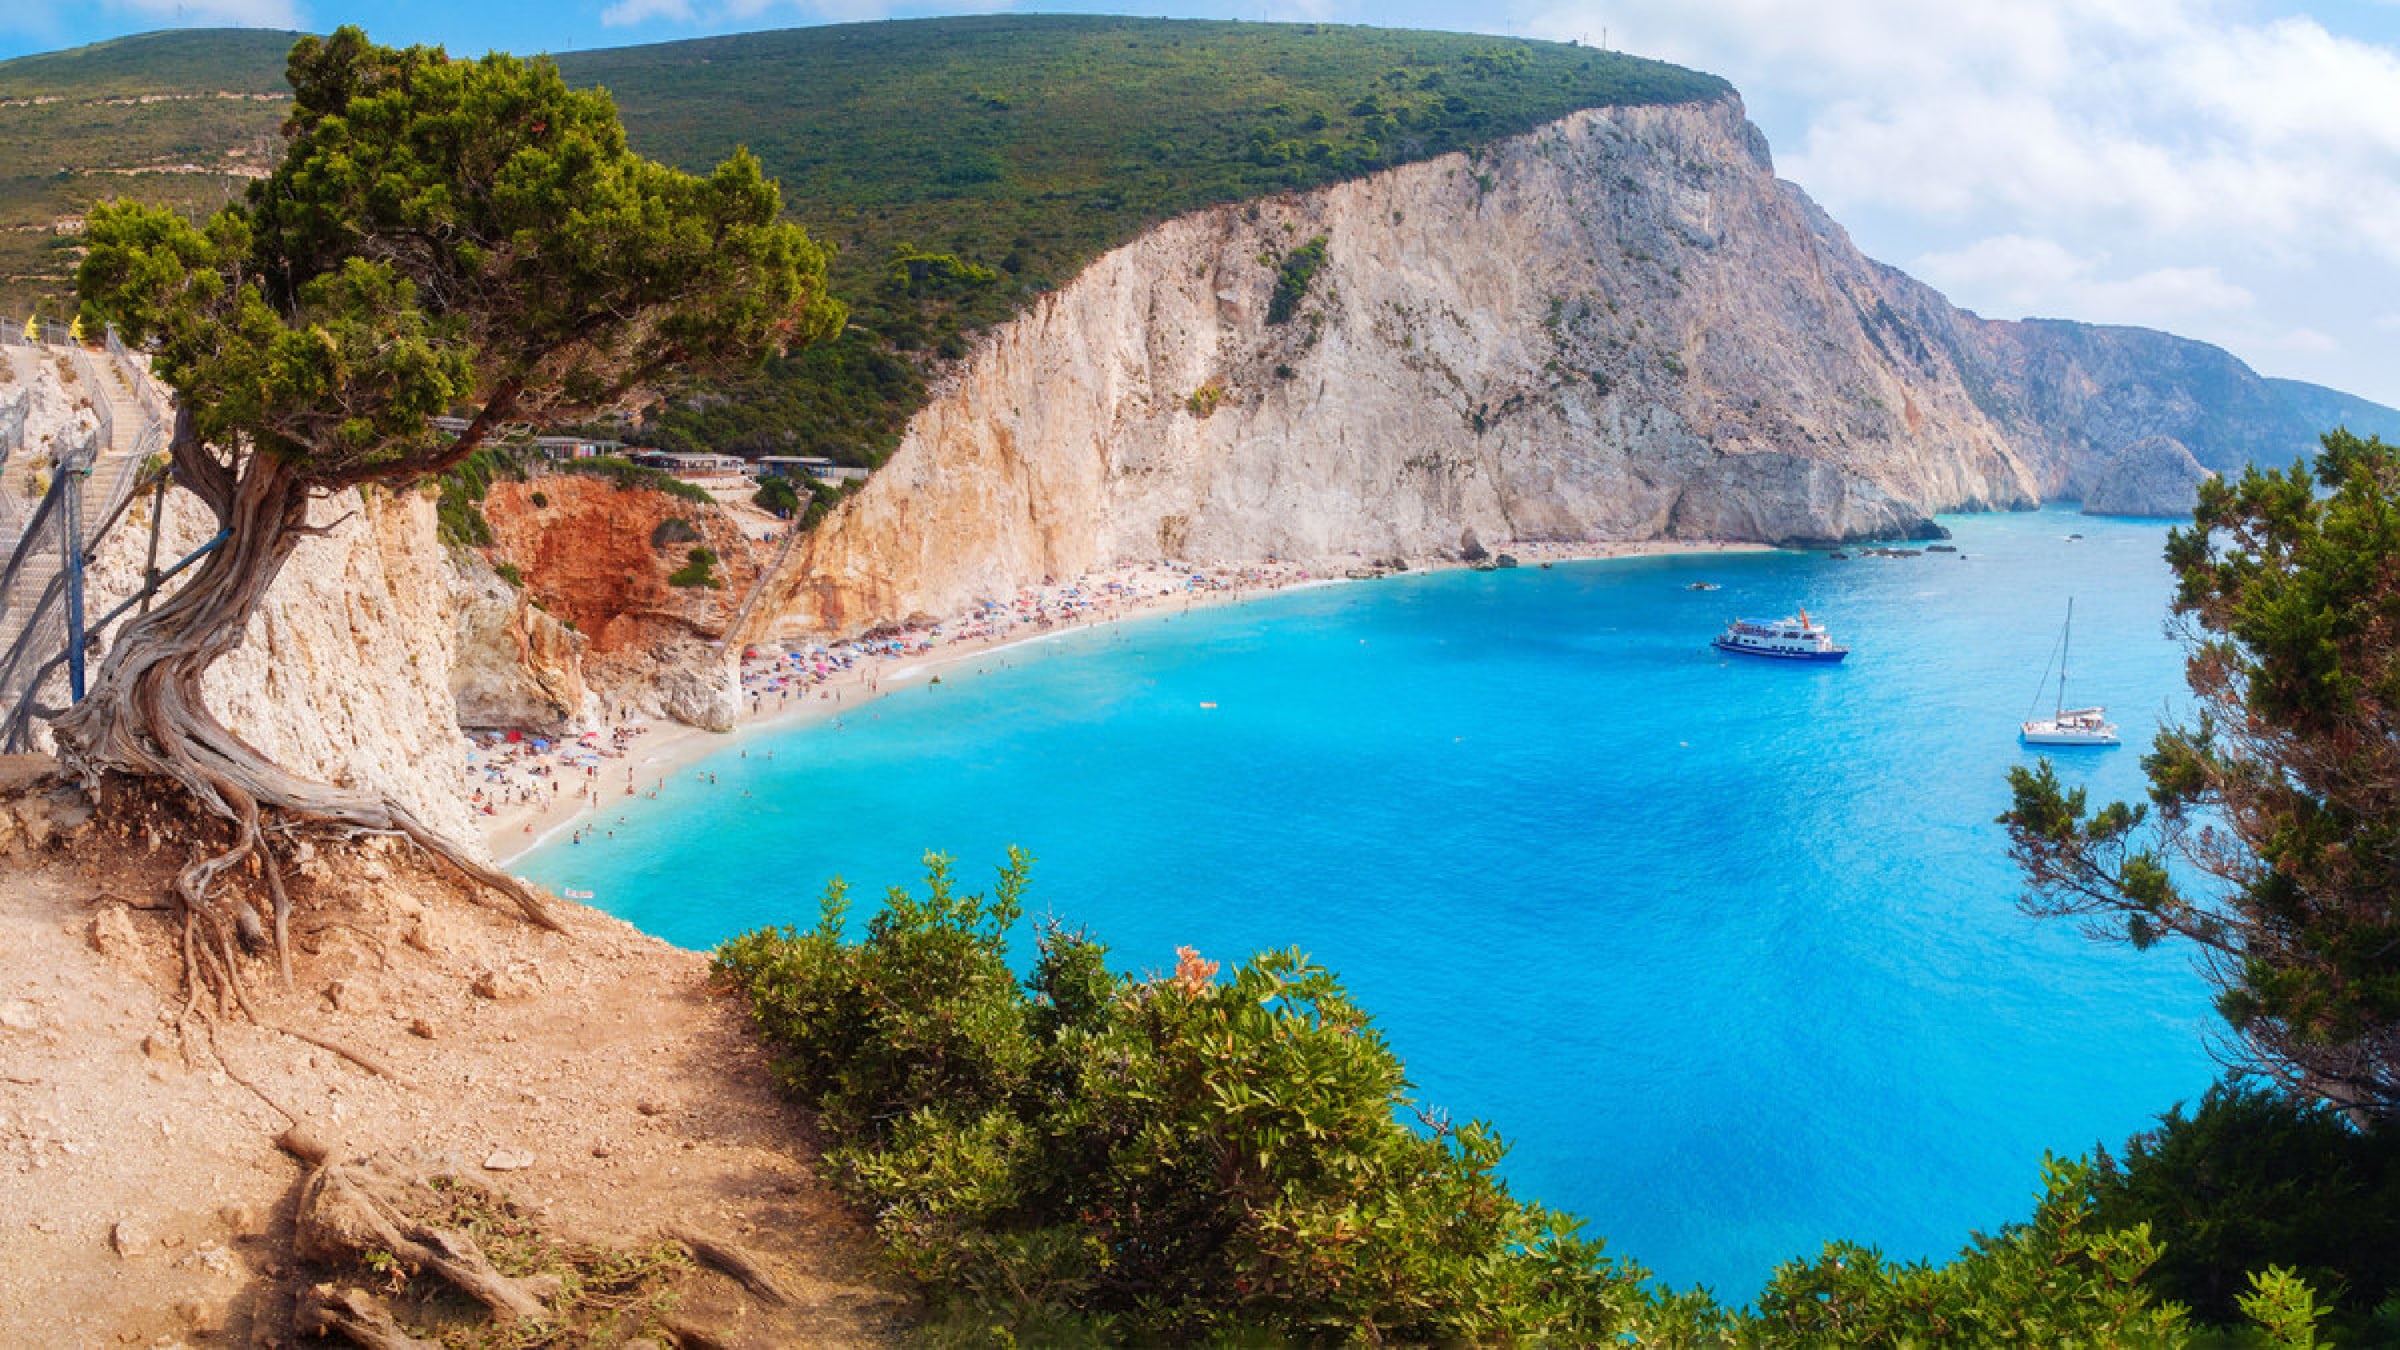 The Greek Island Lefkada May Be Its Most Beautiful (And You've Probably Never Heard of It)